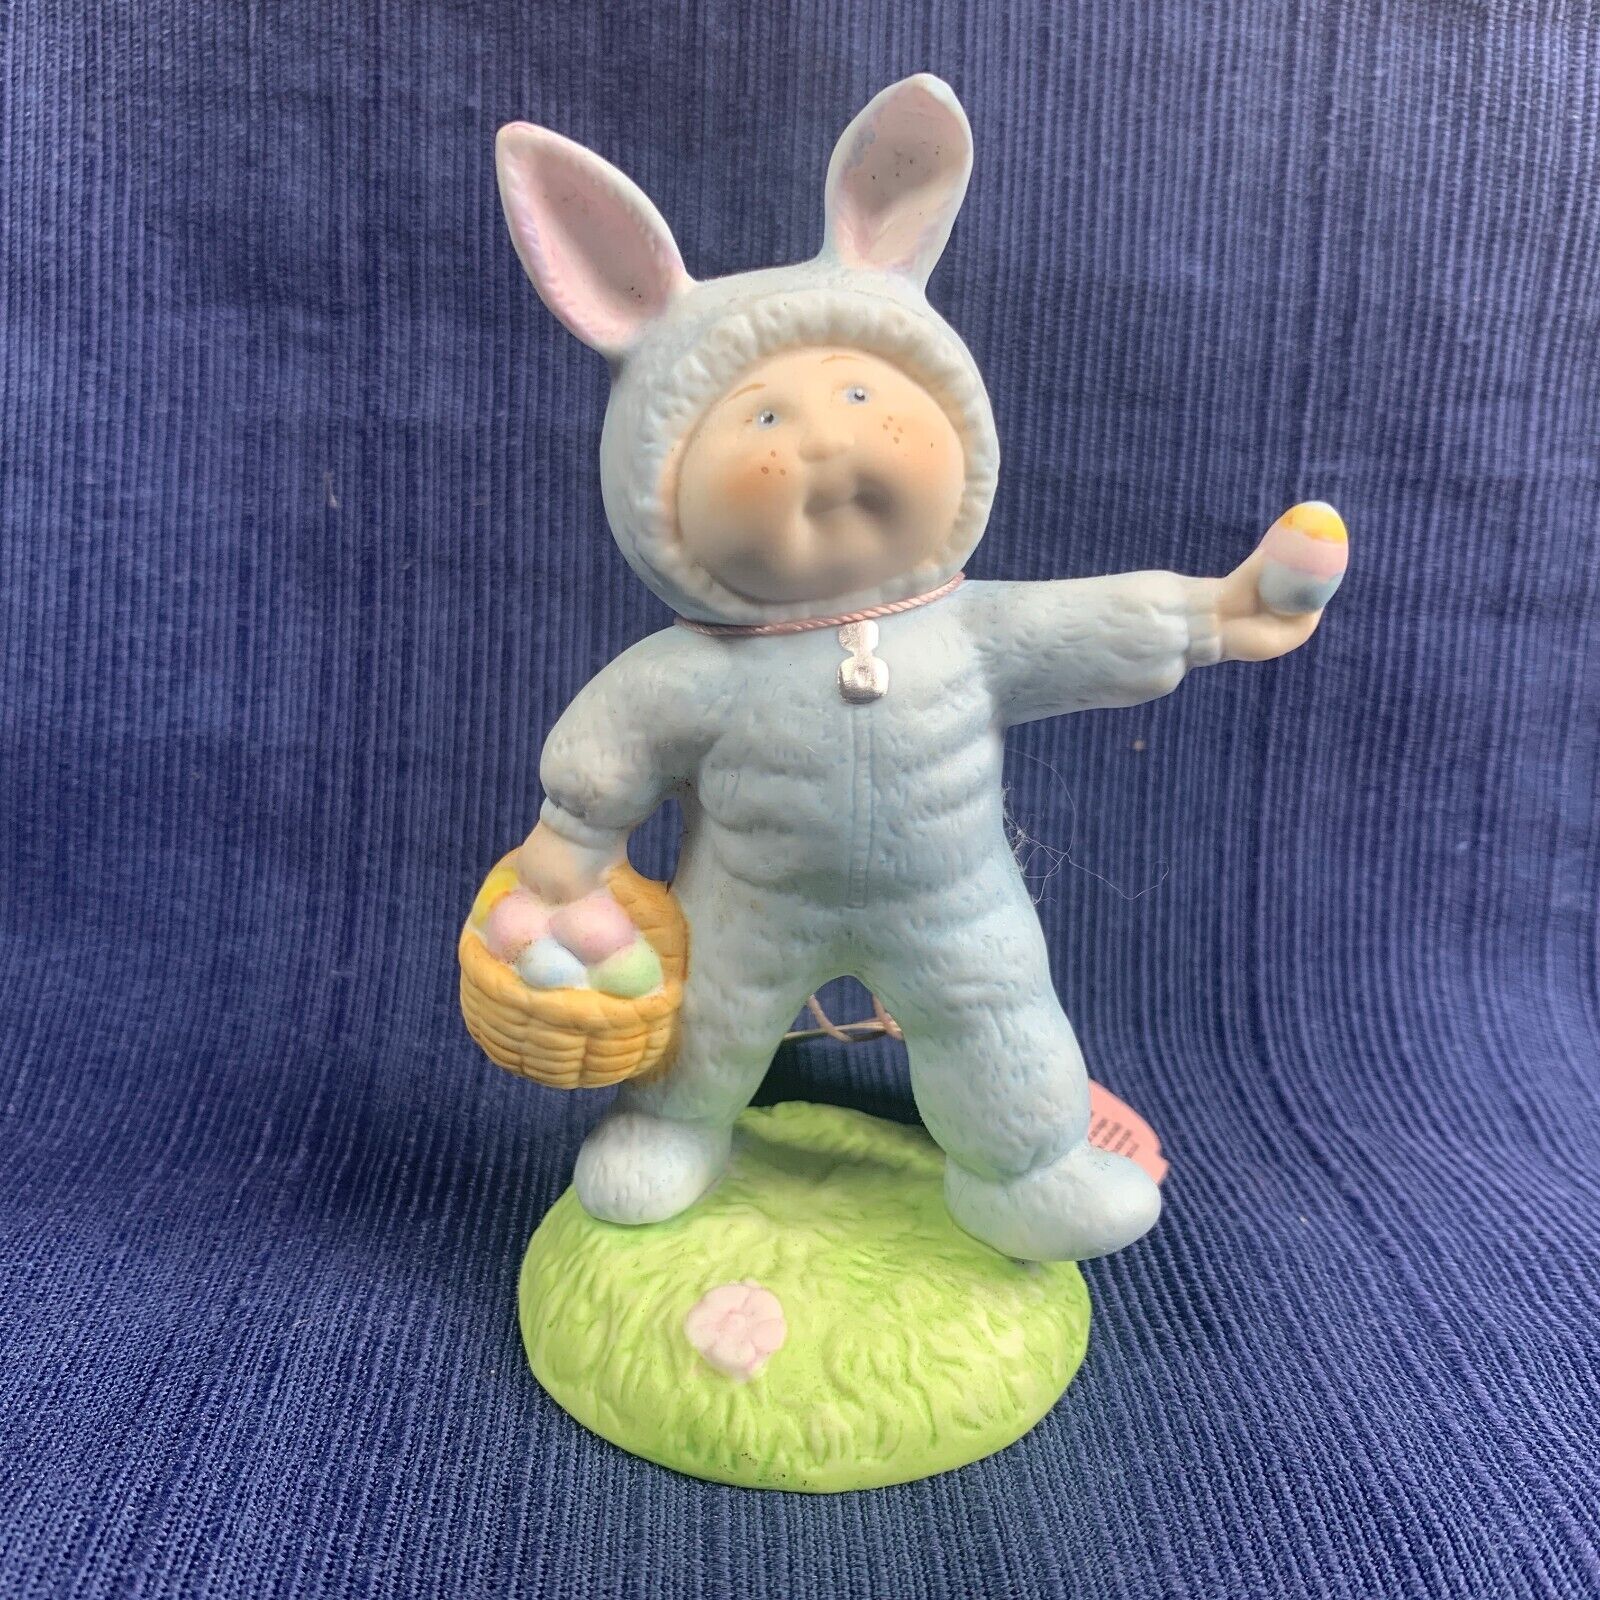 1984 Our Easter Bunny 5476 CABBAGE PATCH KIDS Xavier Roberts Figurine